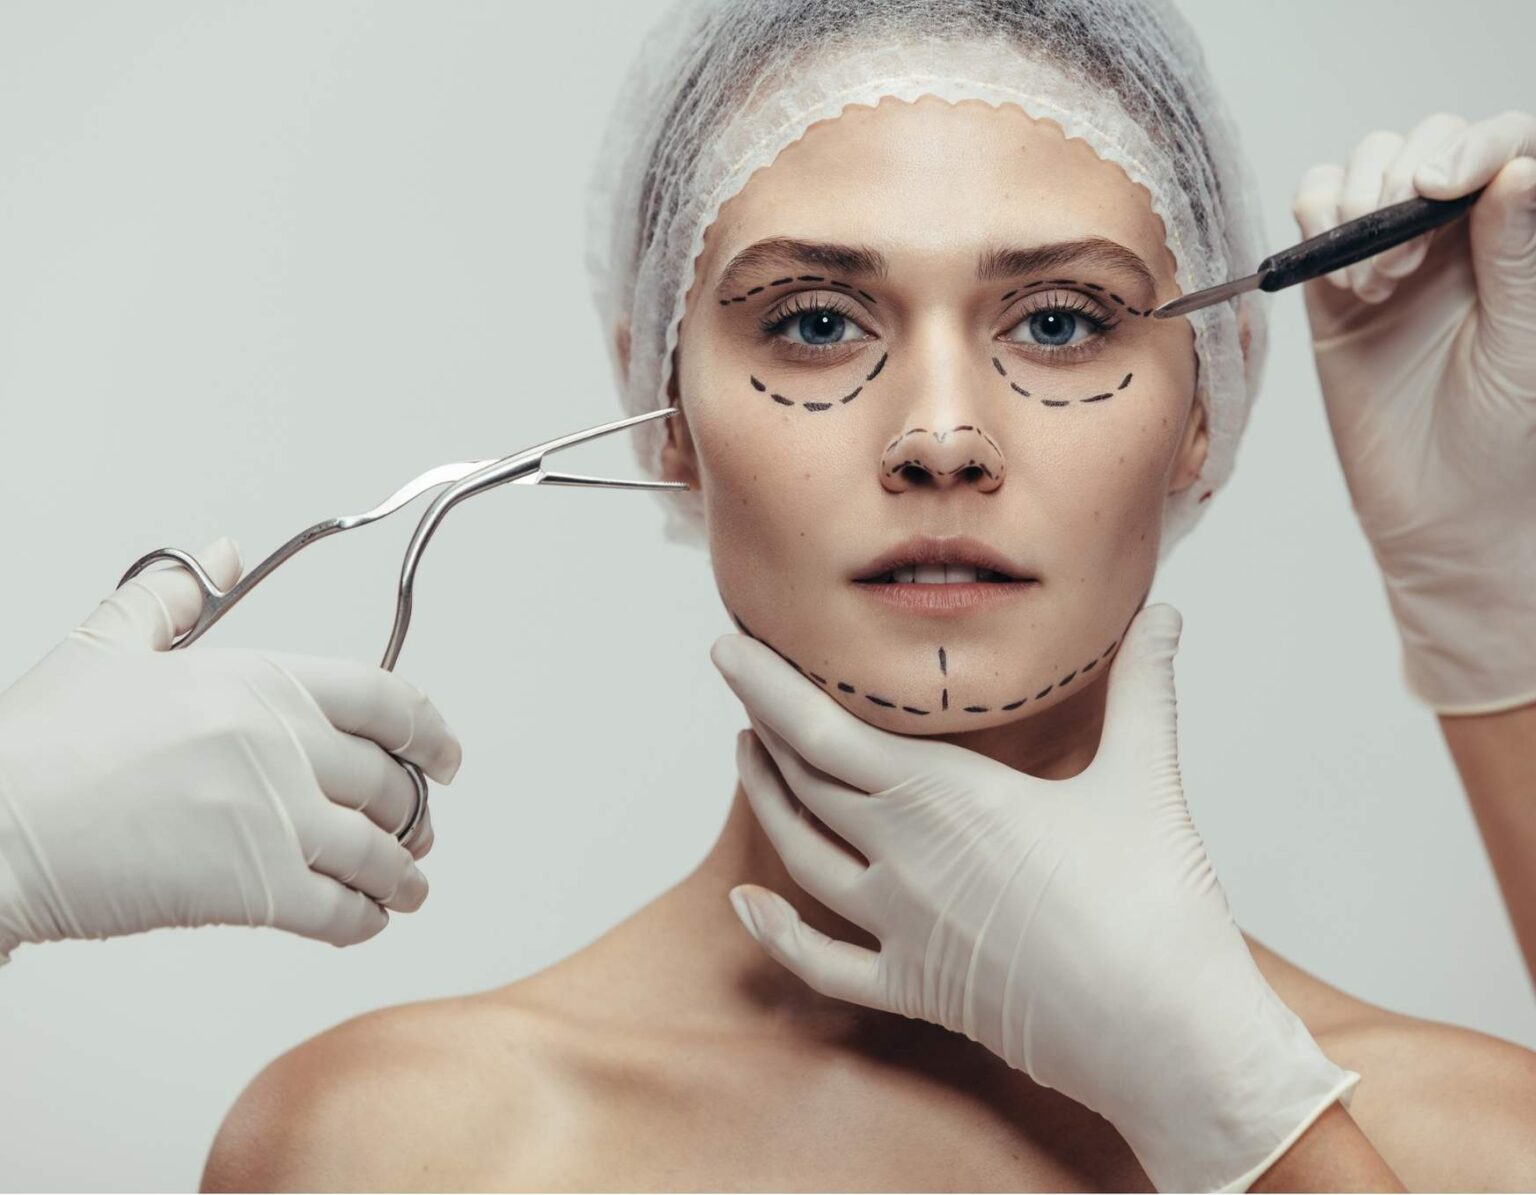 How To Know About Basics Of Cosmetic Surgery 5 Tips To Appreciate The